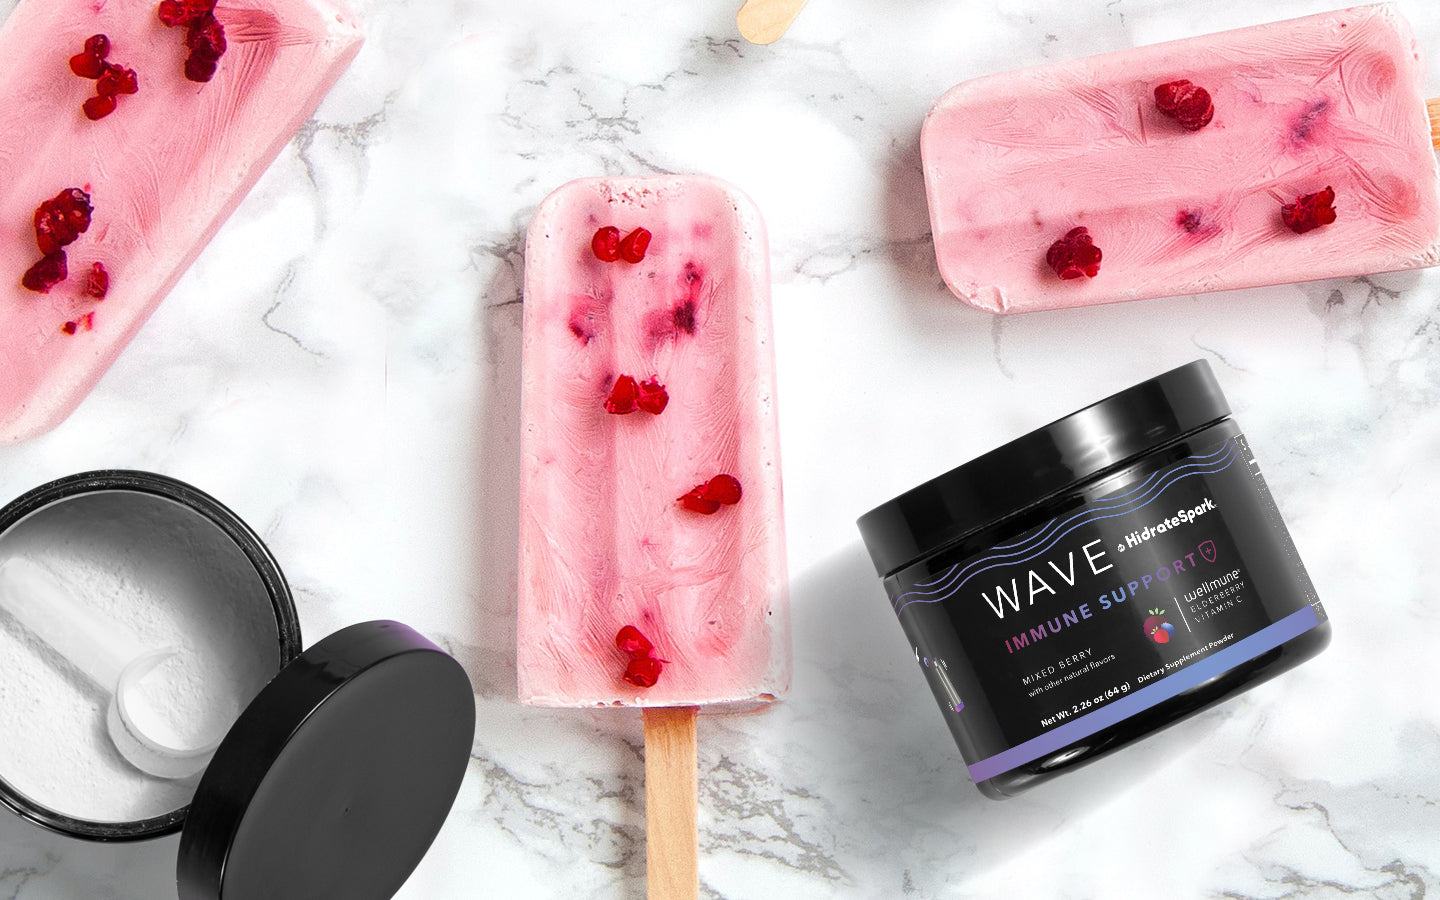 Cool Off and Get a Boost: HidrateSpark WAVE Popsicle & Drink Recipes